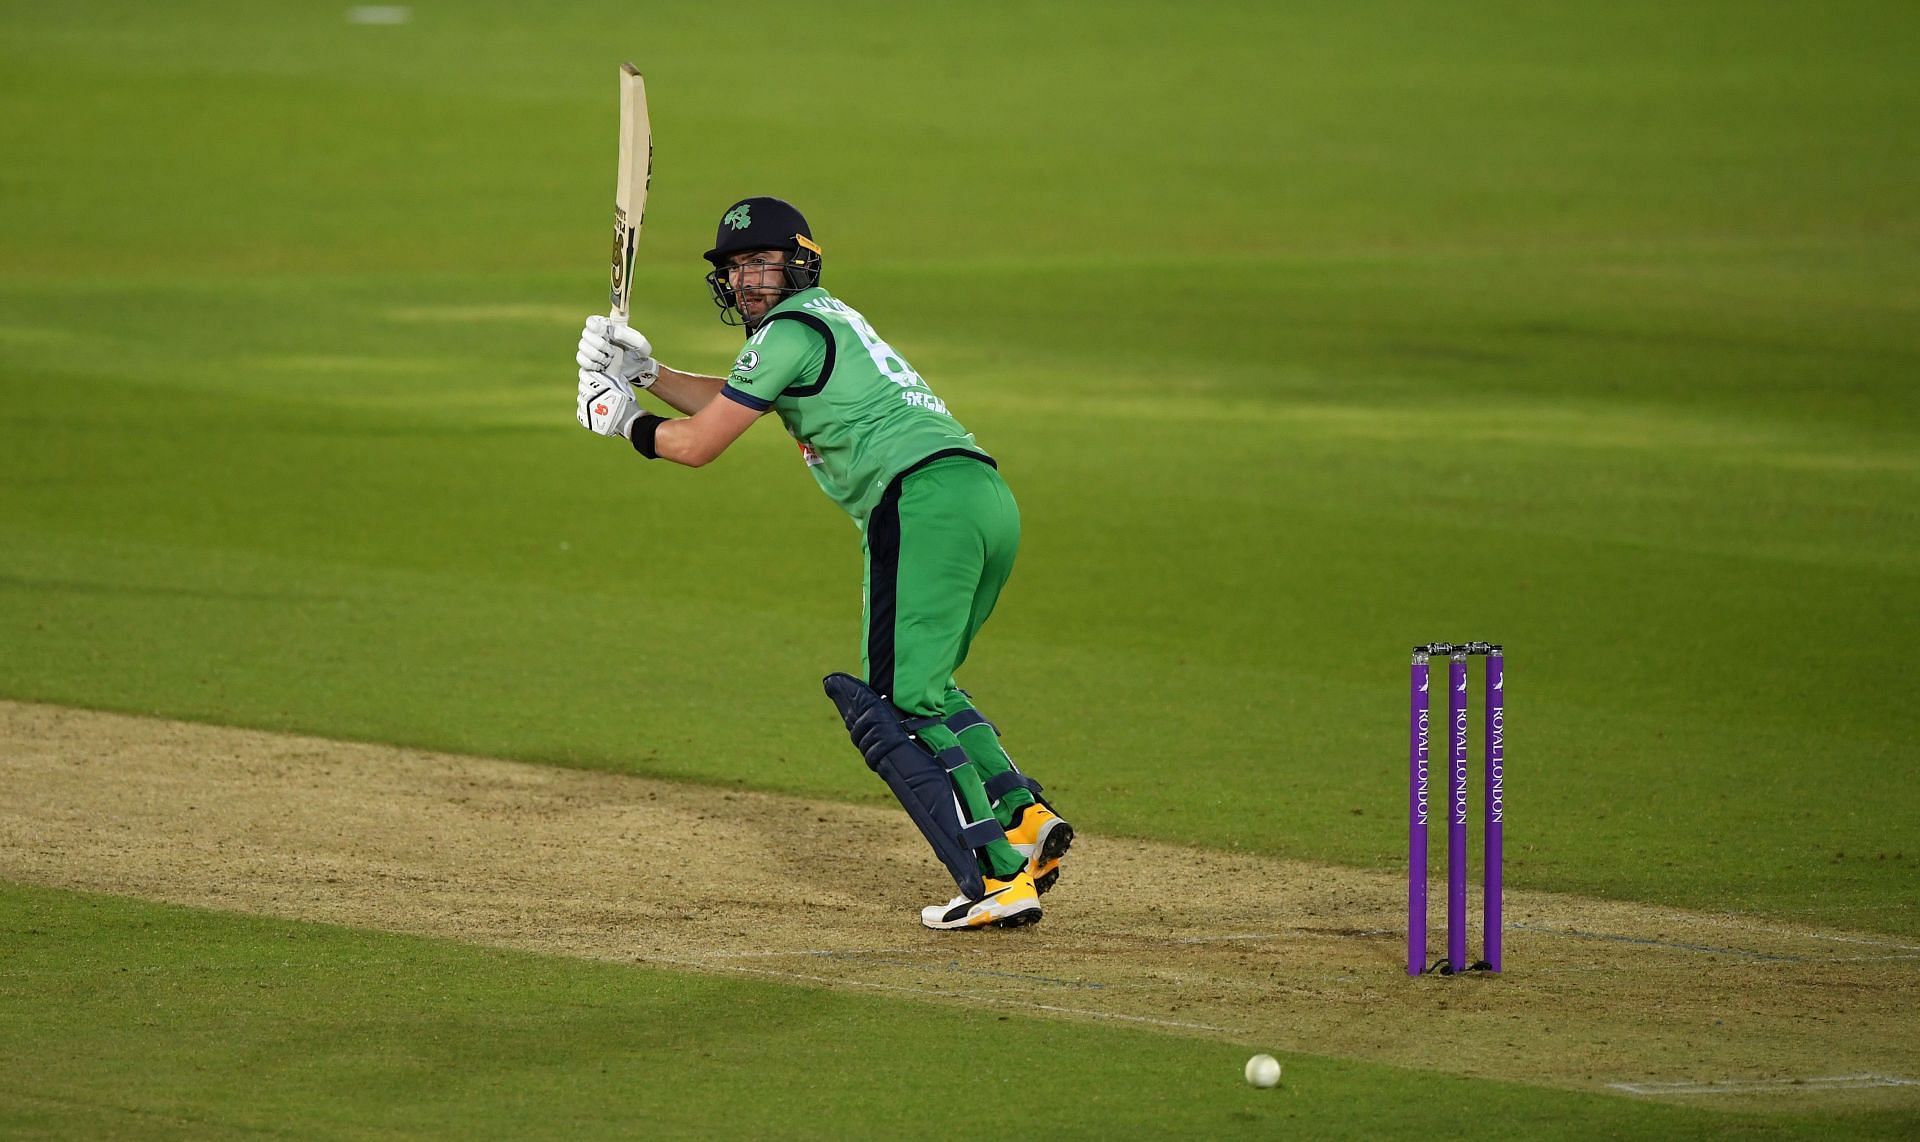 Skipper Andy Balbirnie remains the fulcrum of the Ireland batting outfit.